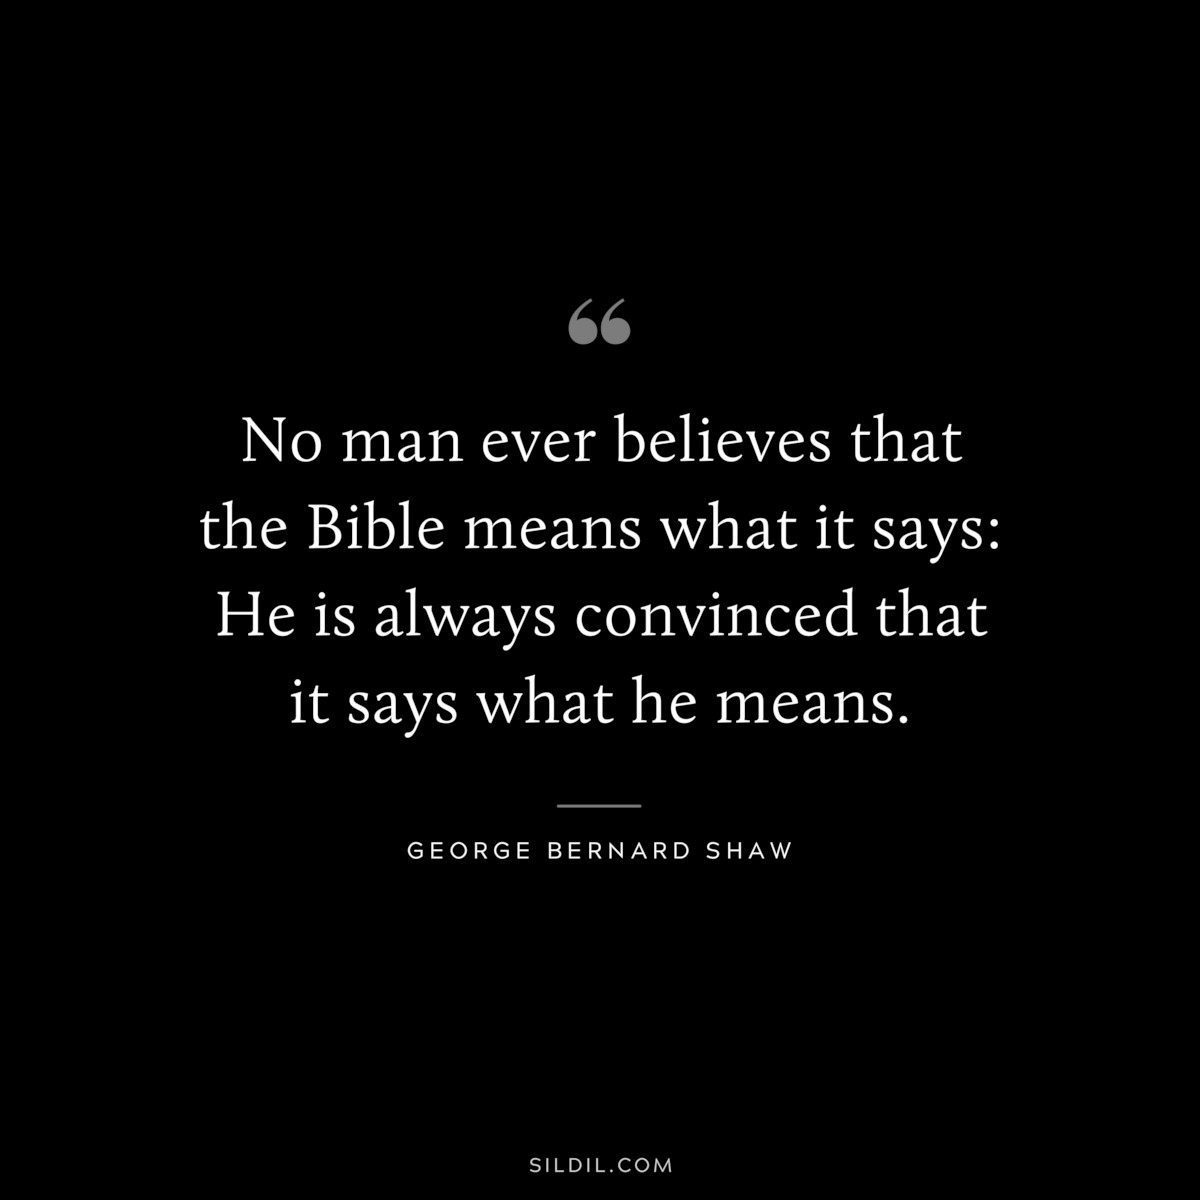 No man ever believes that the Bible means what it says: He is always convinced that it says what he means. ― George Bernard Shaw